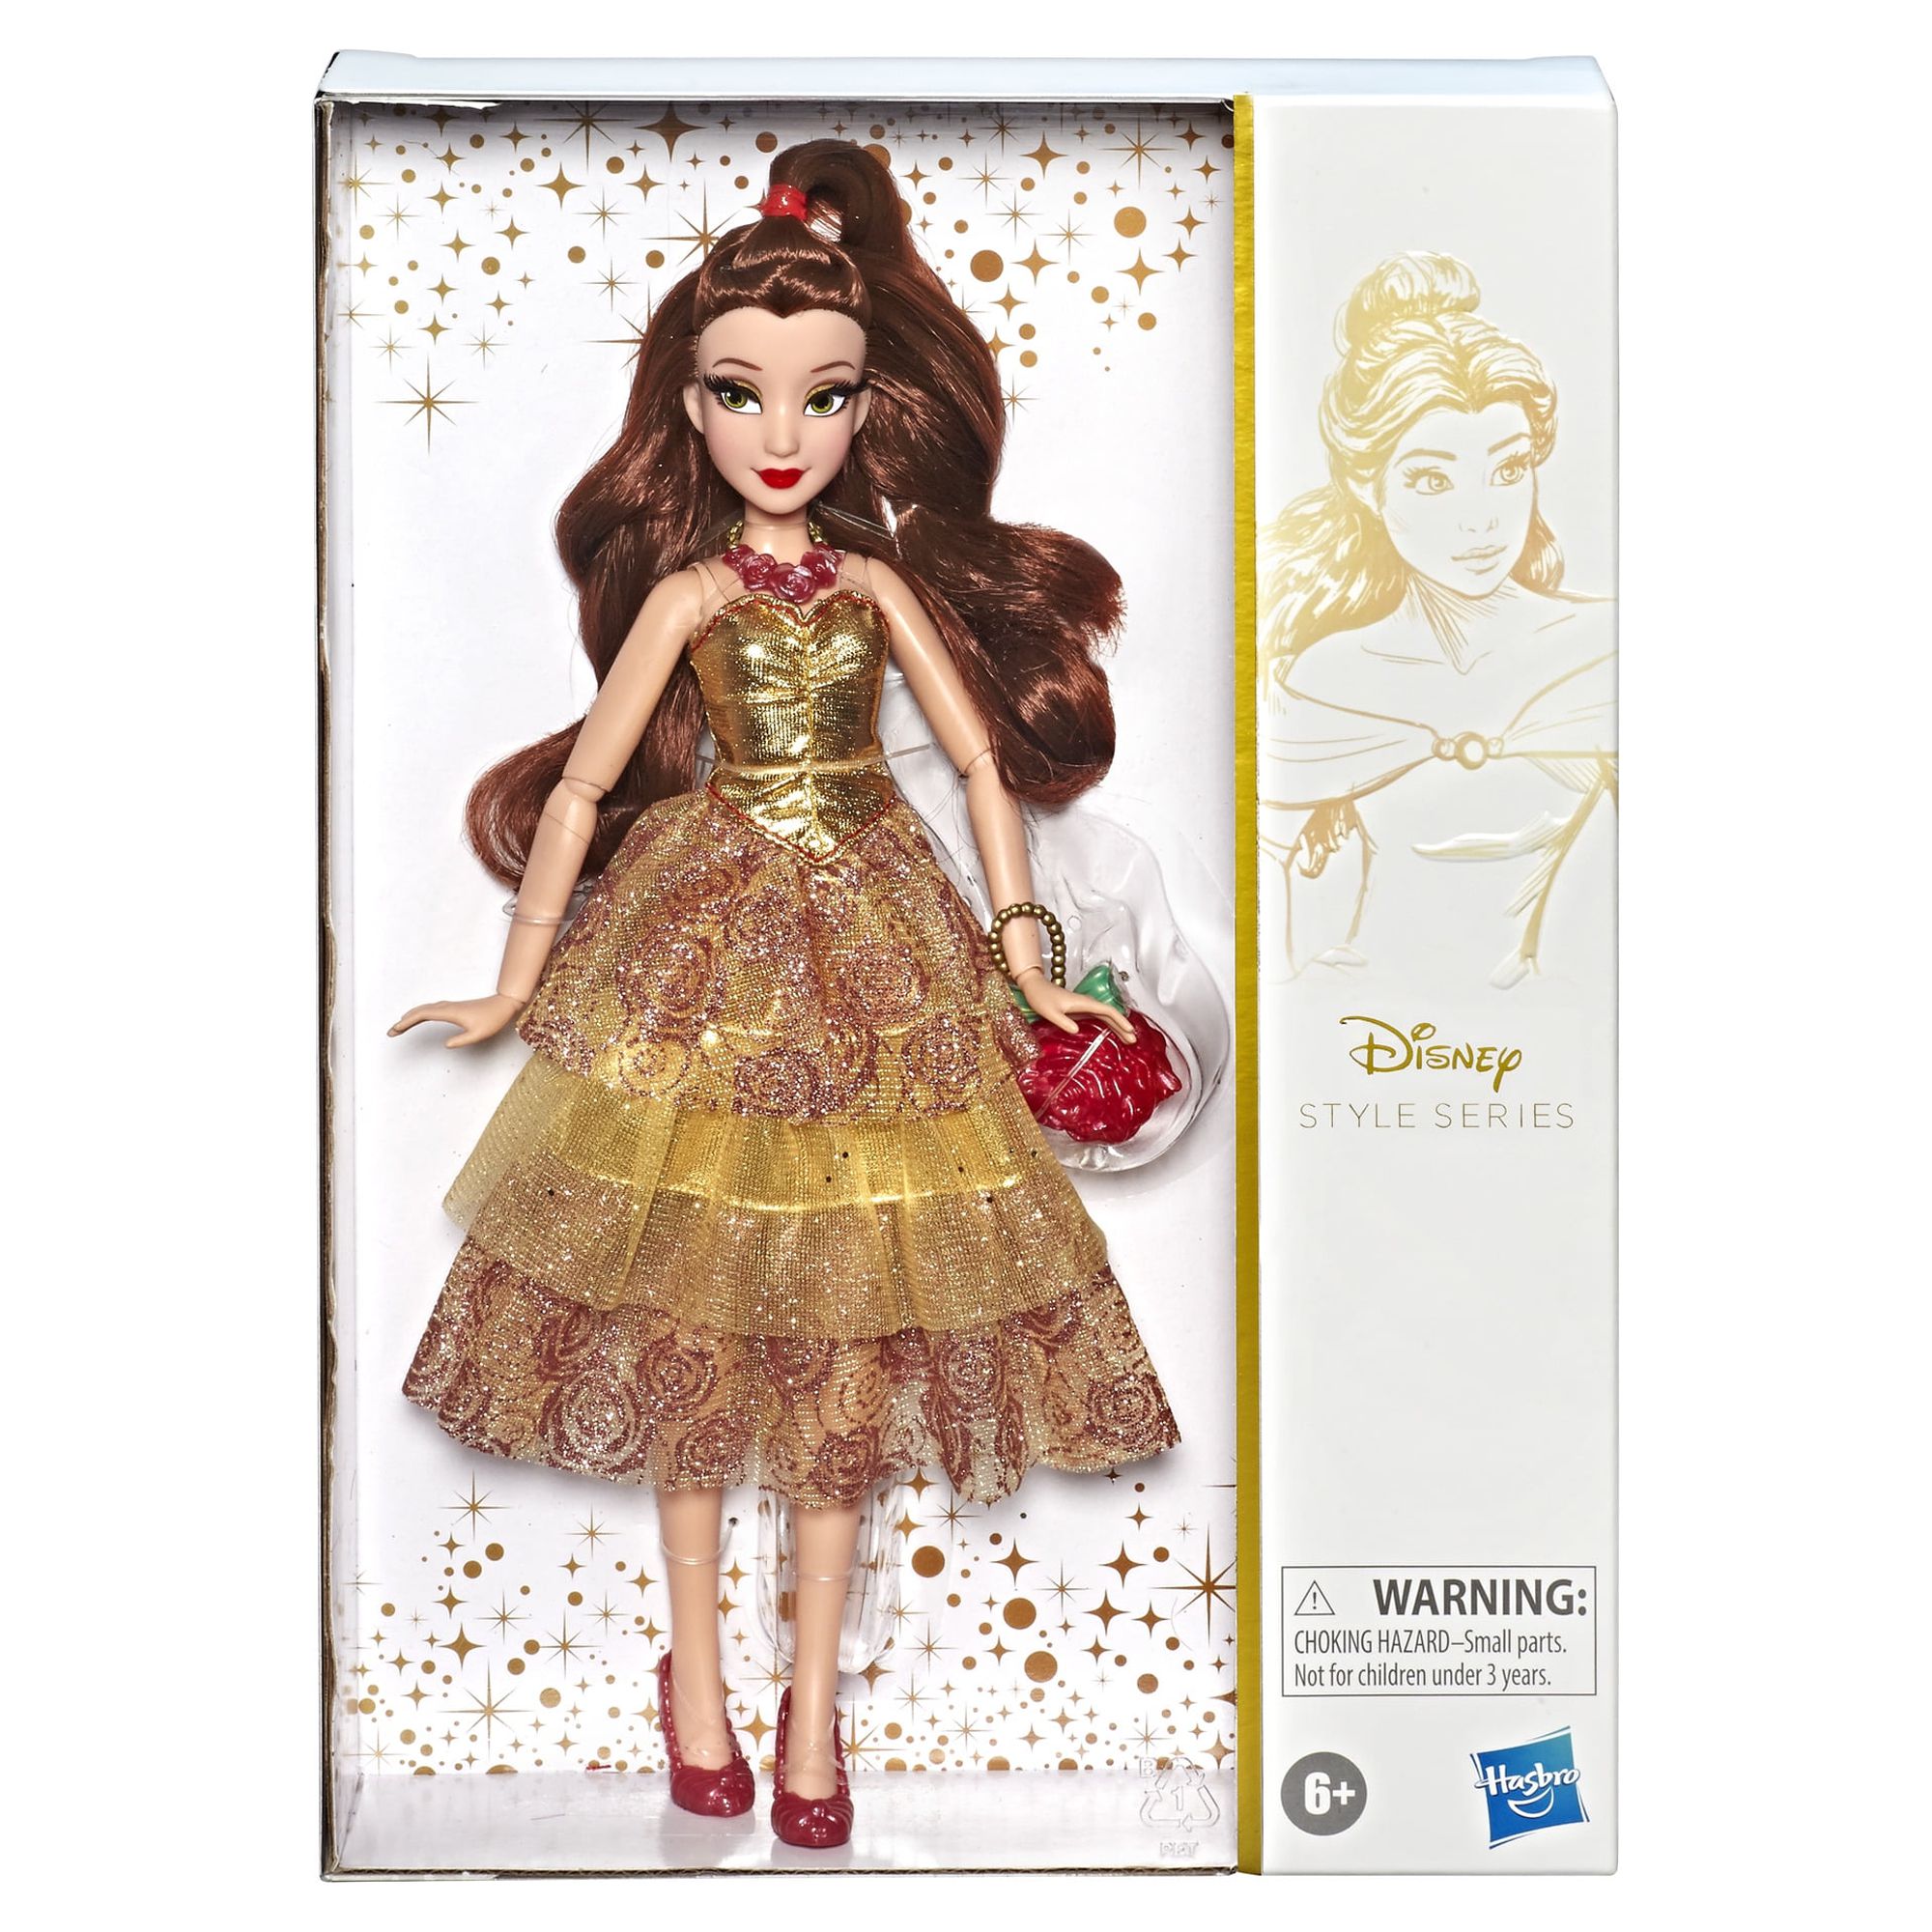 Disney Princess Style Series, Belle Fashion Doll In Contemporary Style - image 2 of 9